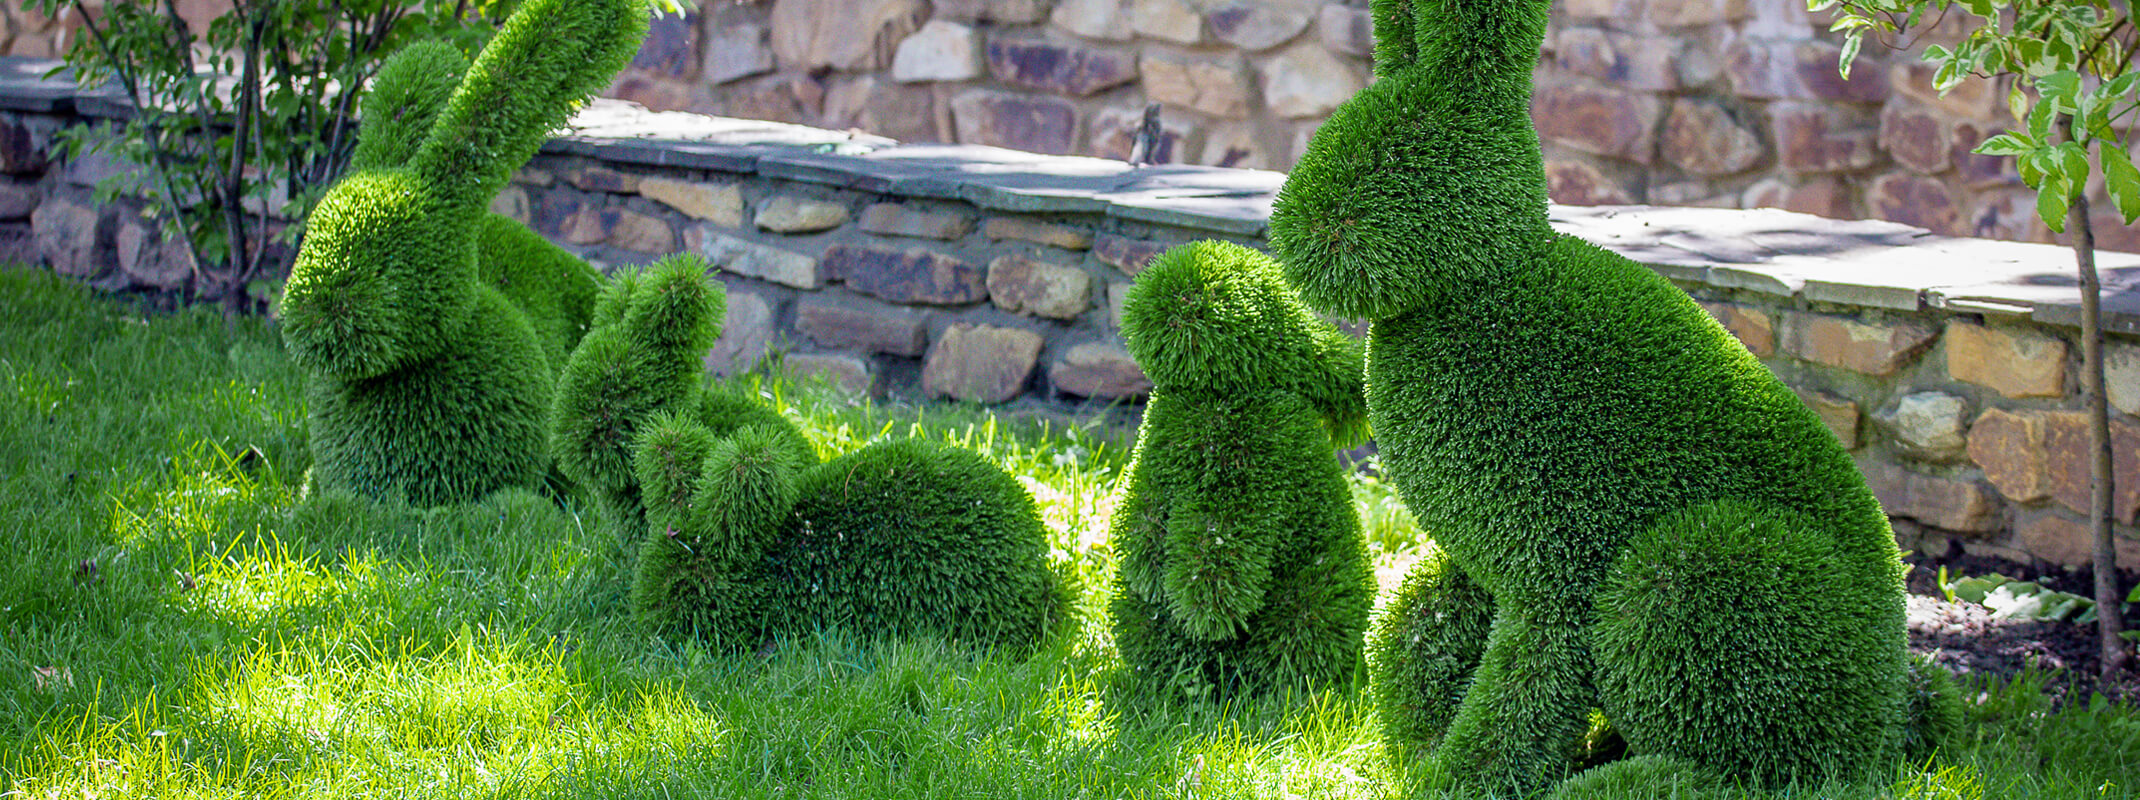 Family of bunny topiaries in a landscape with a half brick wall behind them